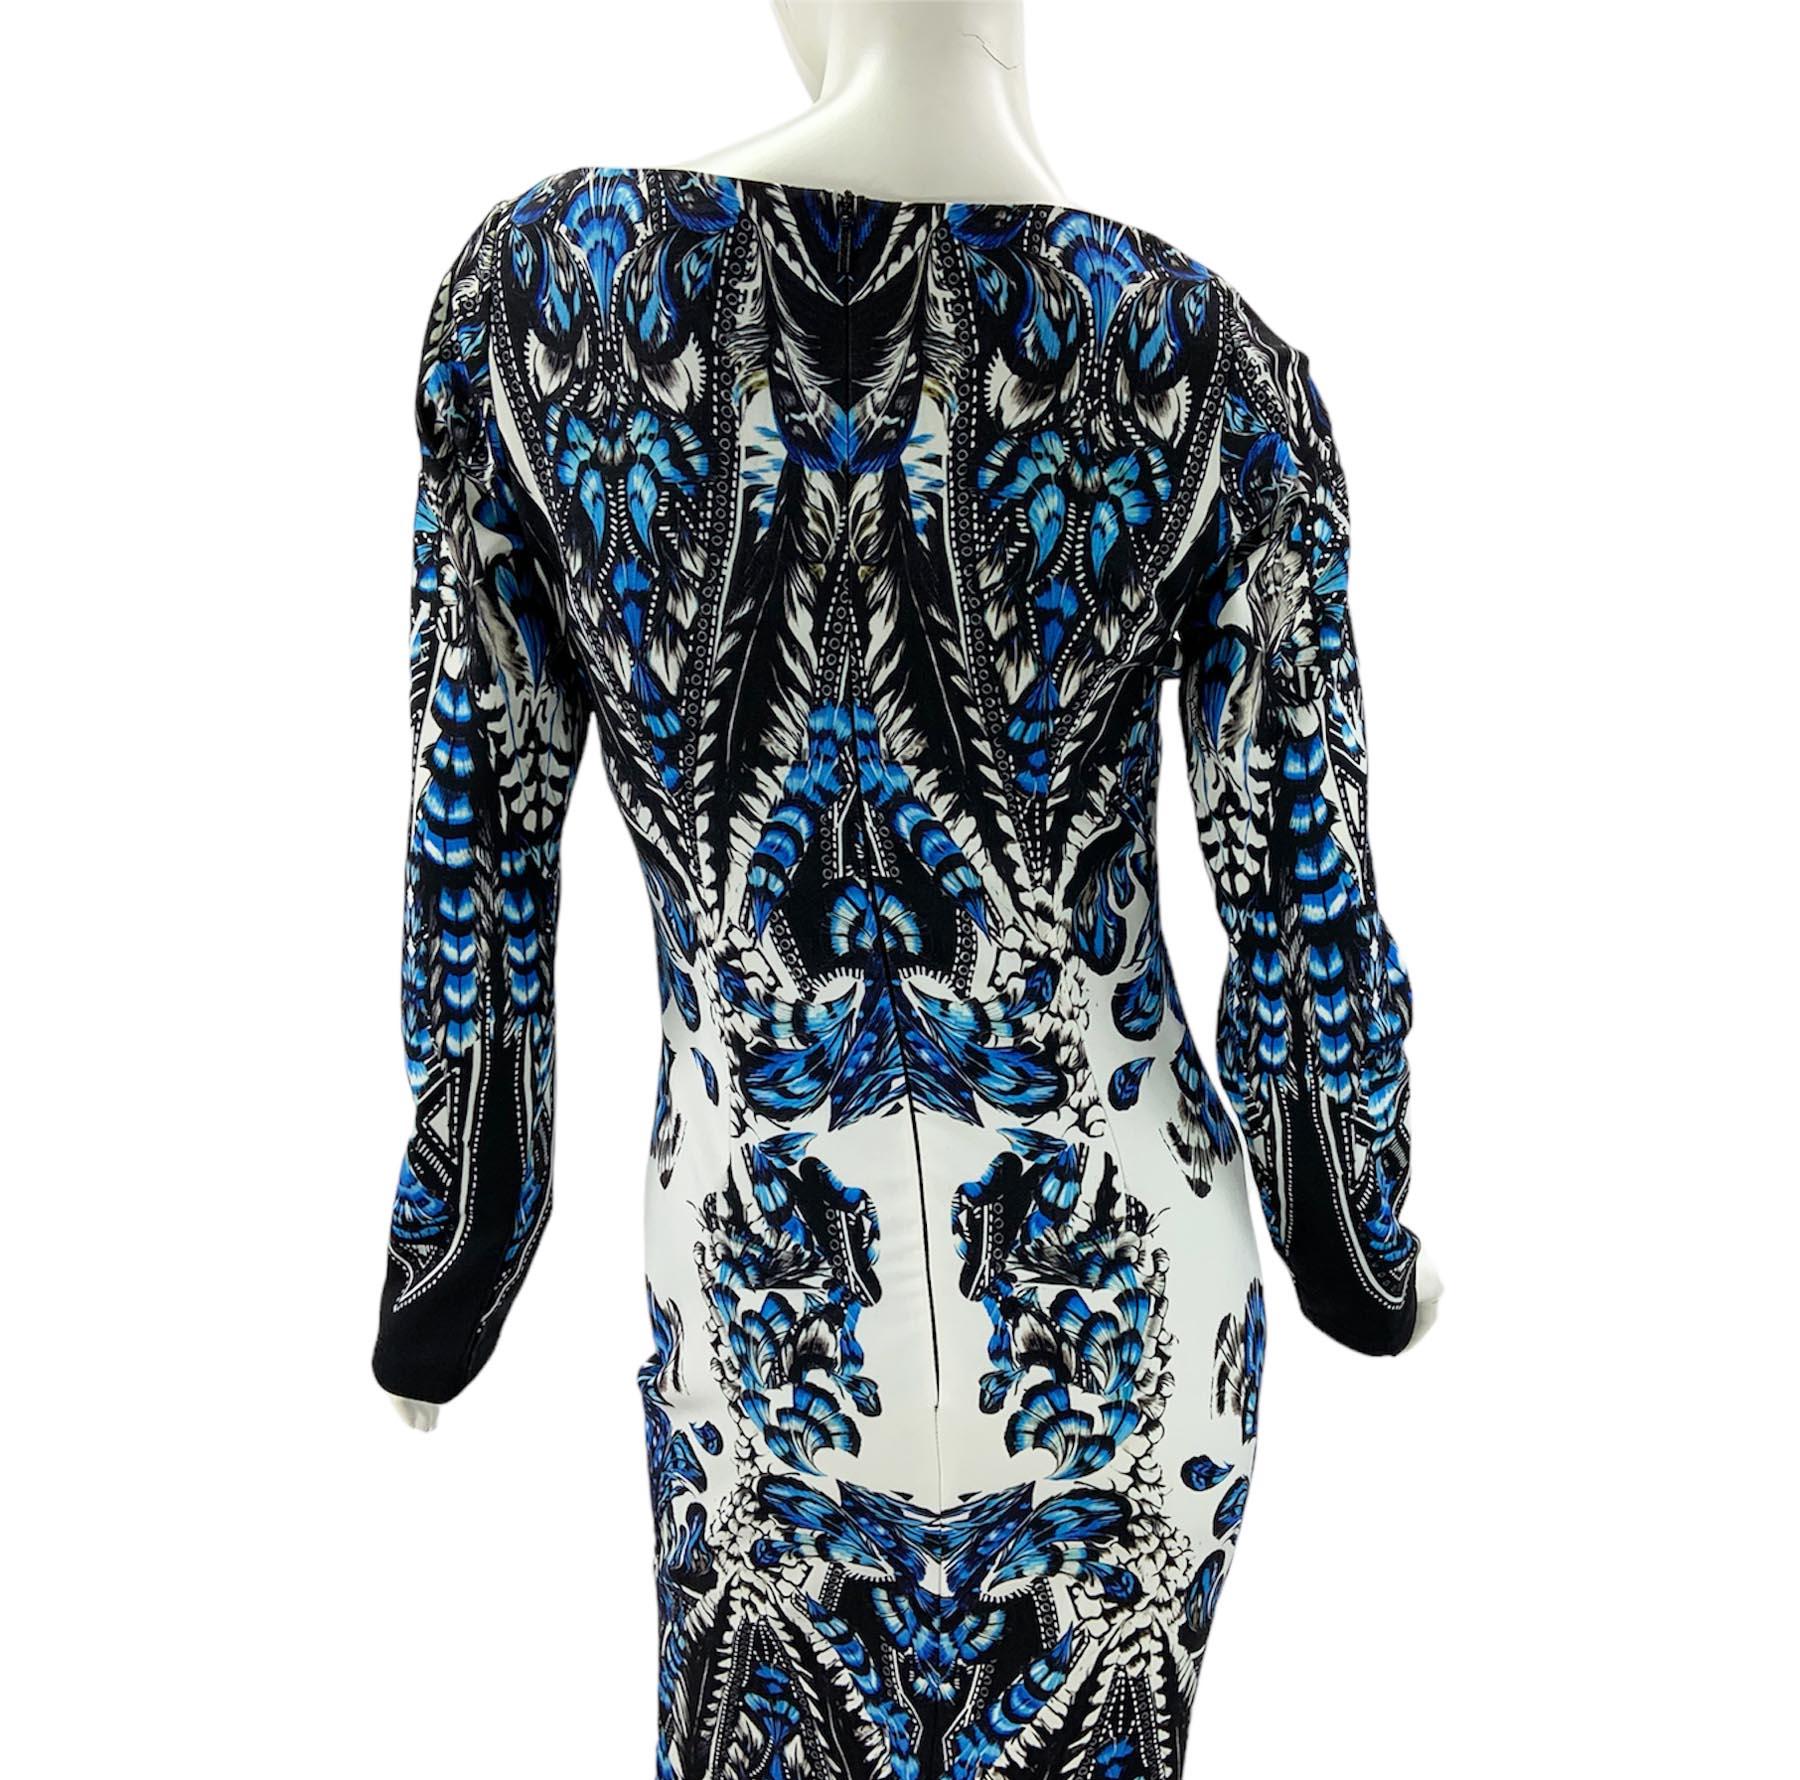 New Roberto Cavalli Feather Print Blue White Dress Gown Italian 36 For Sale 4